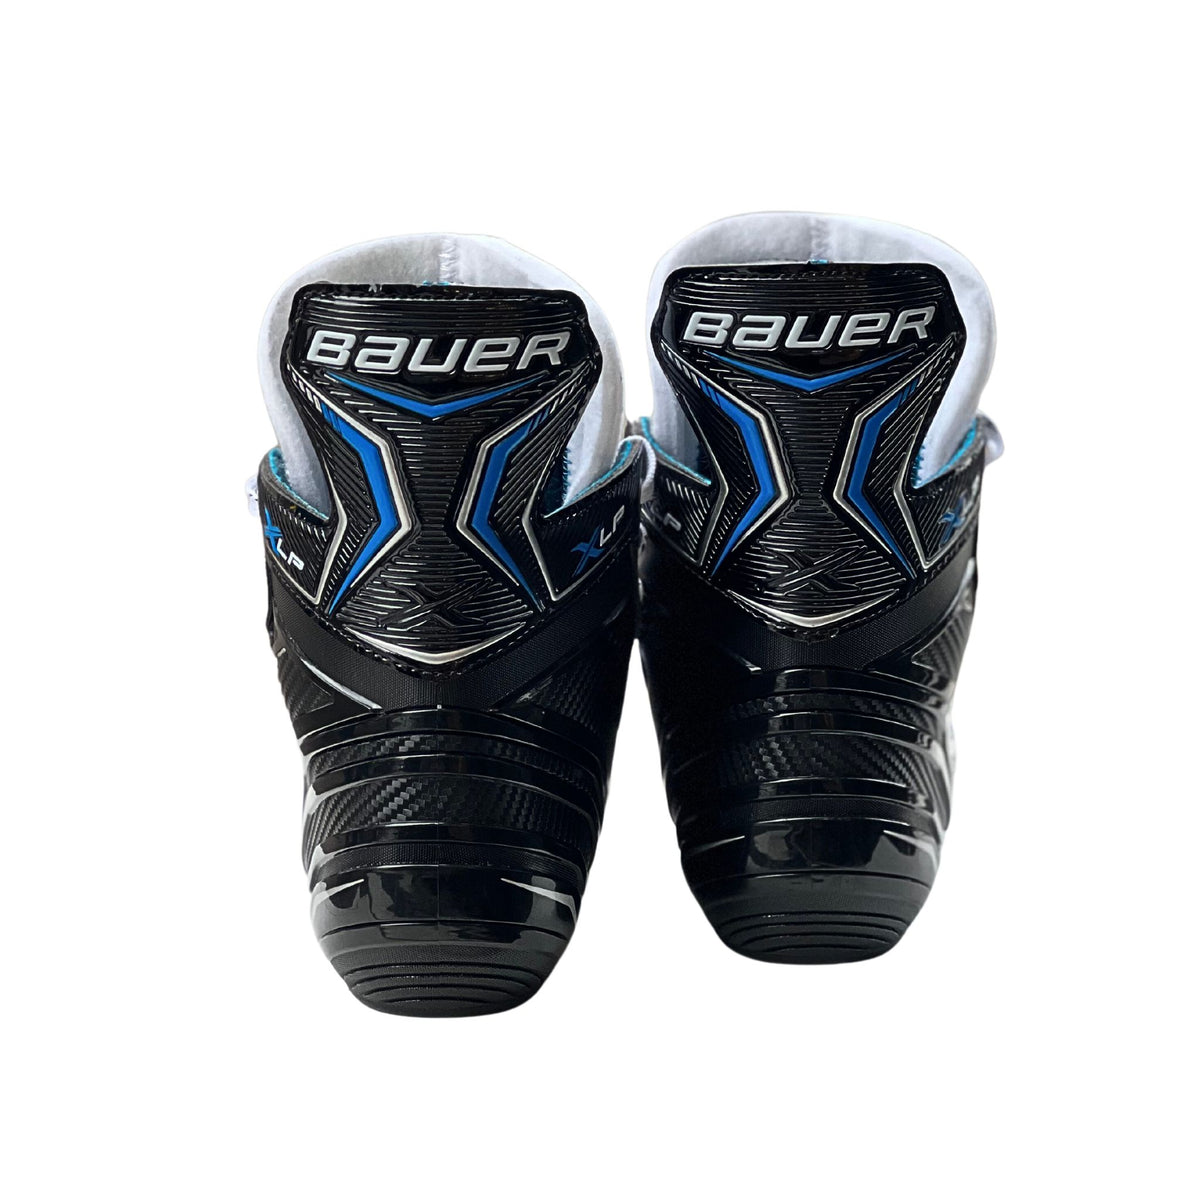 Bauer X-LP Boots - Pair of Boots only - Roller Skates | JT Skate